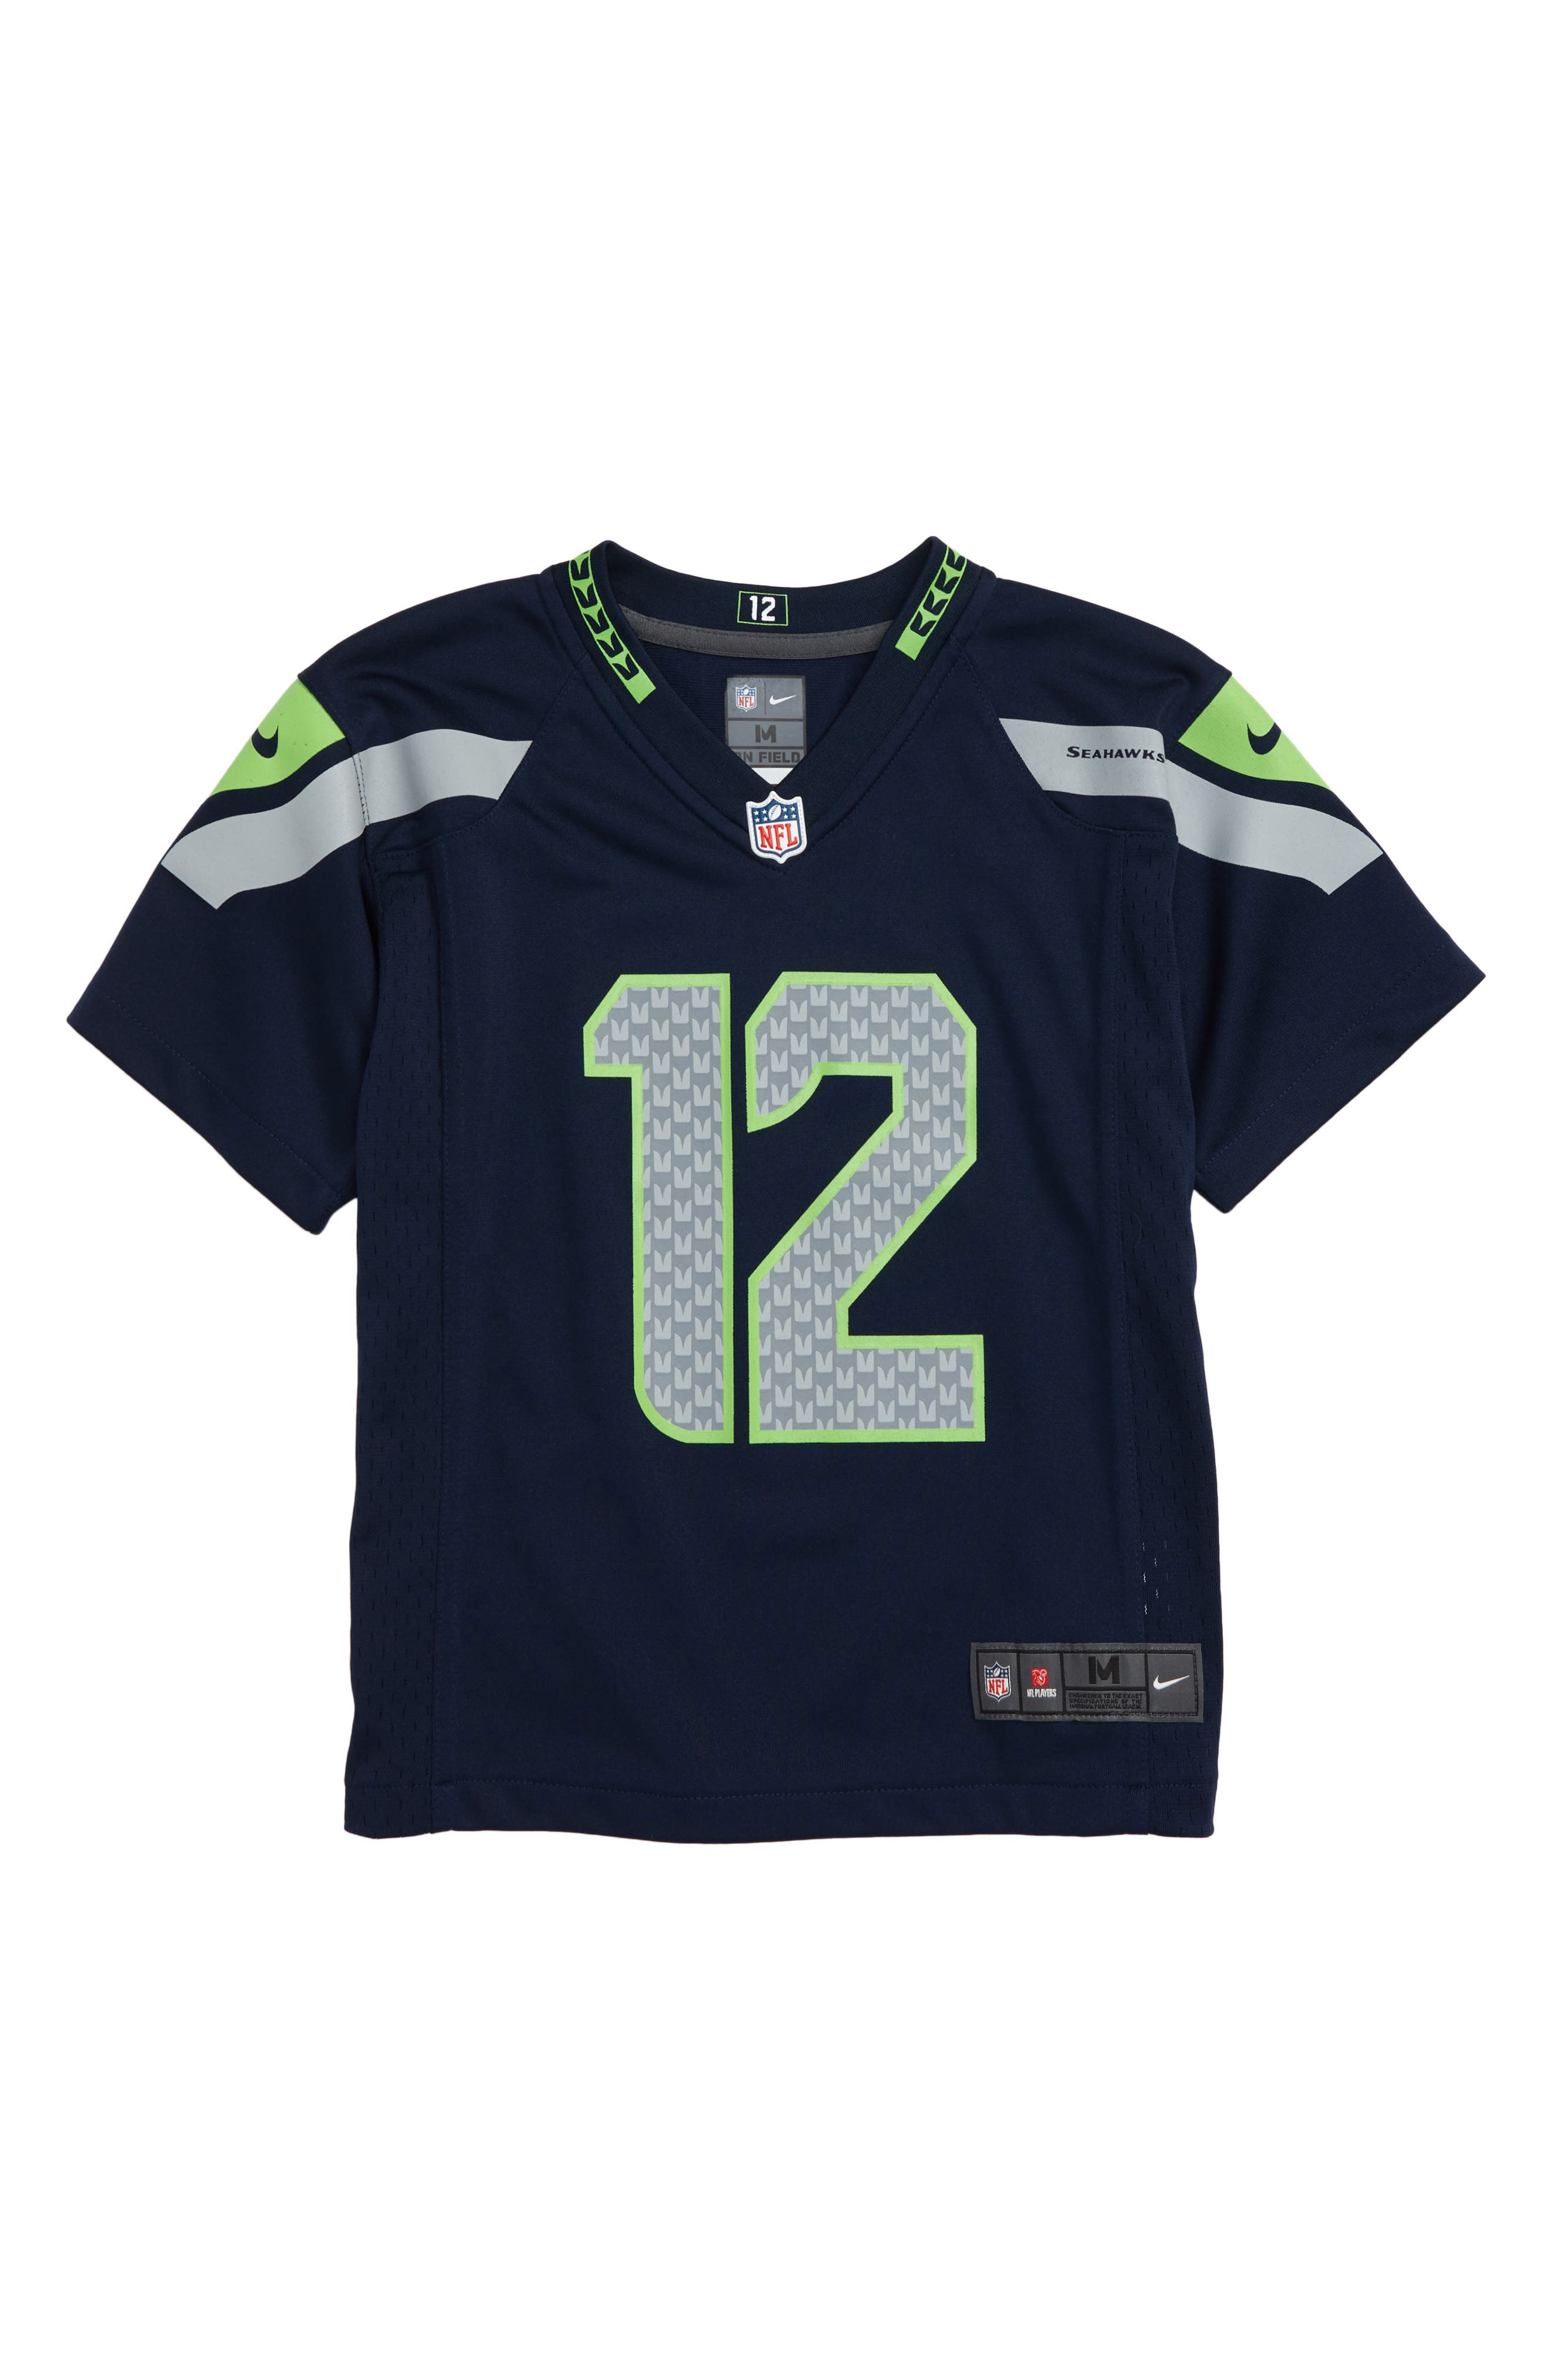 seahawks jersey today